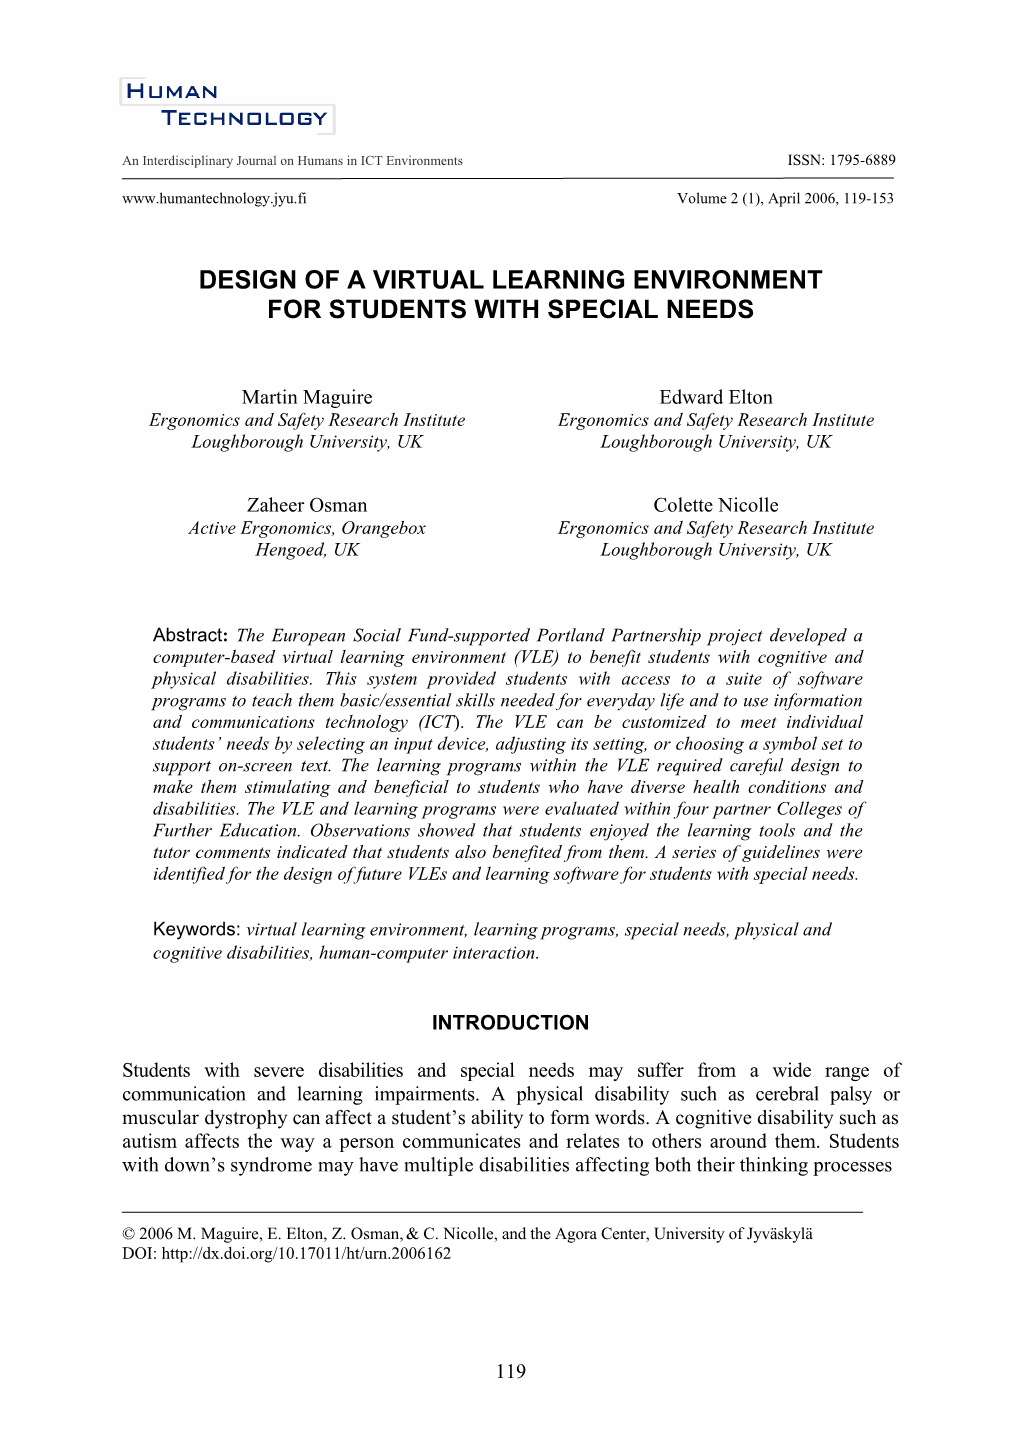 Design of a Virtual Learning Environment for Students with Special Needs